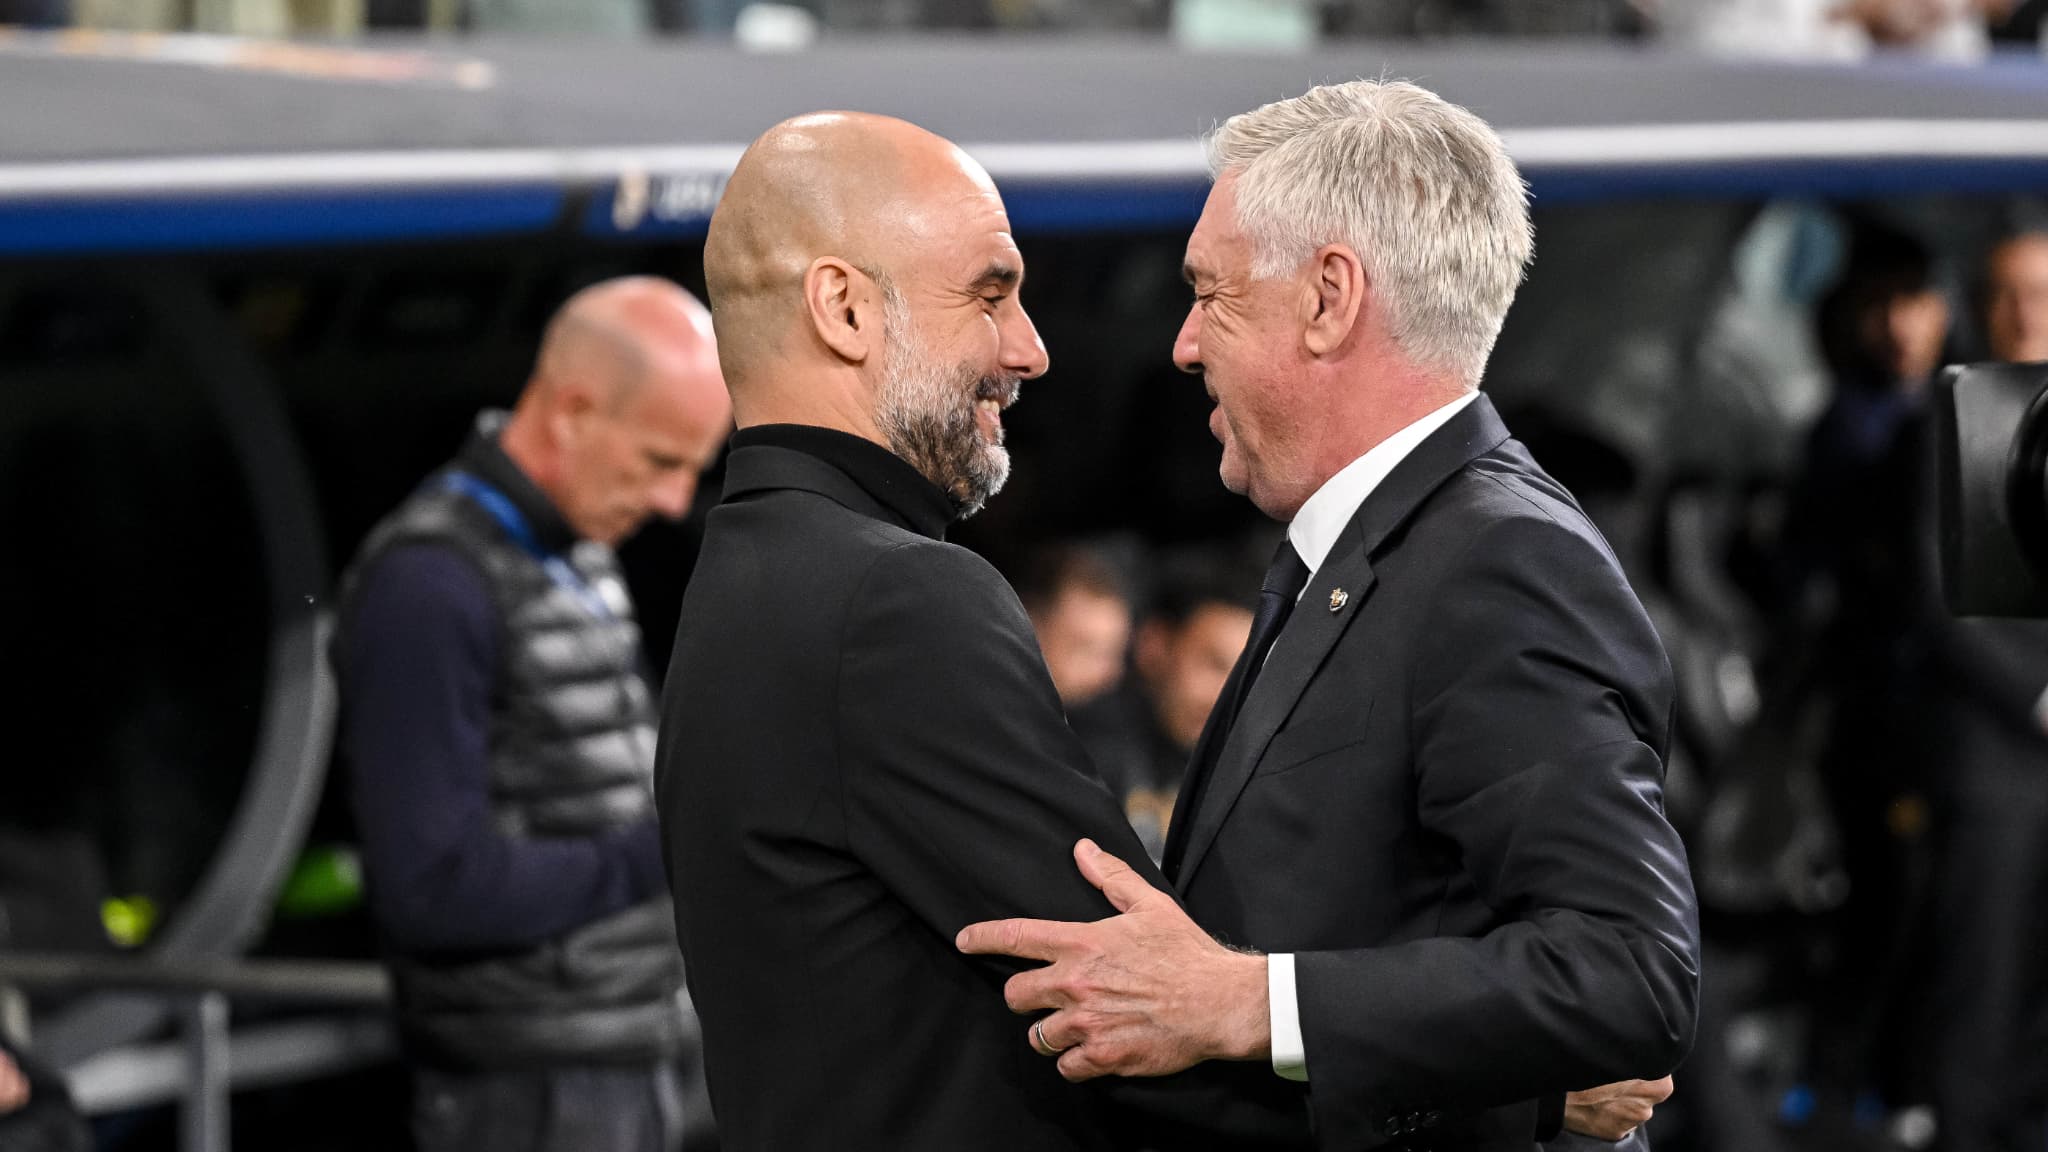 Ancelotti’s funny message to Guardiola before the second leg